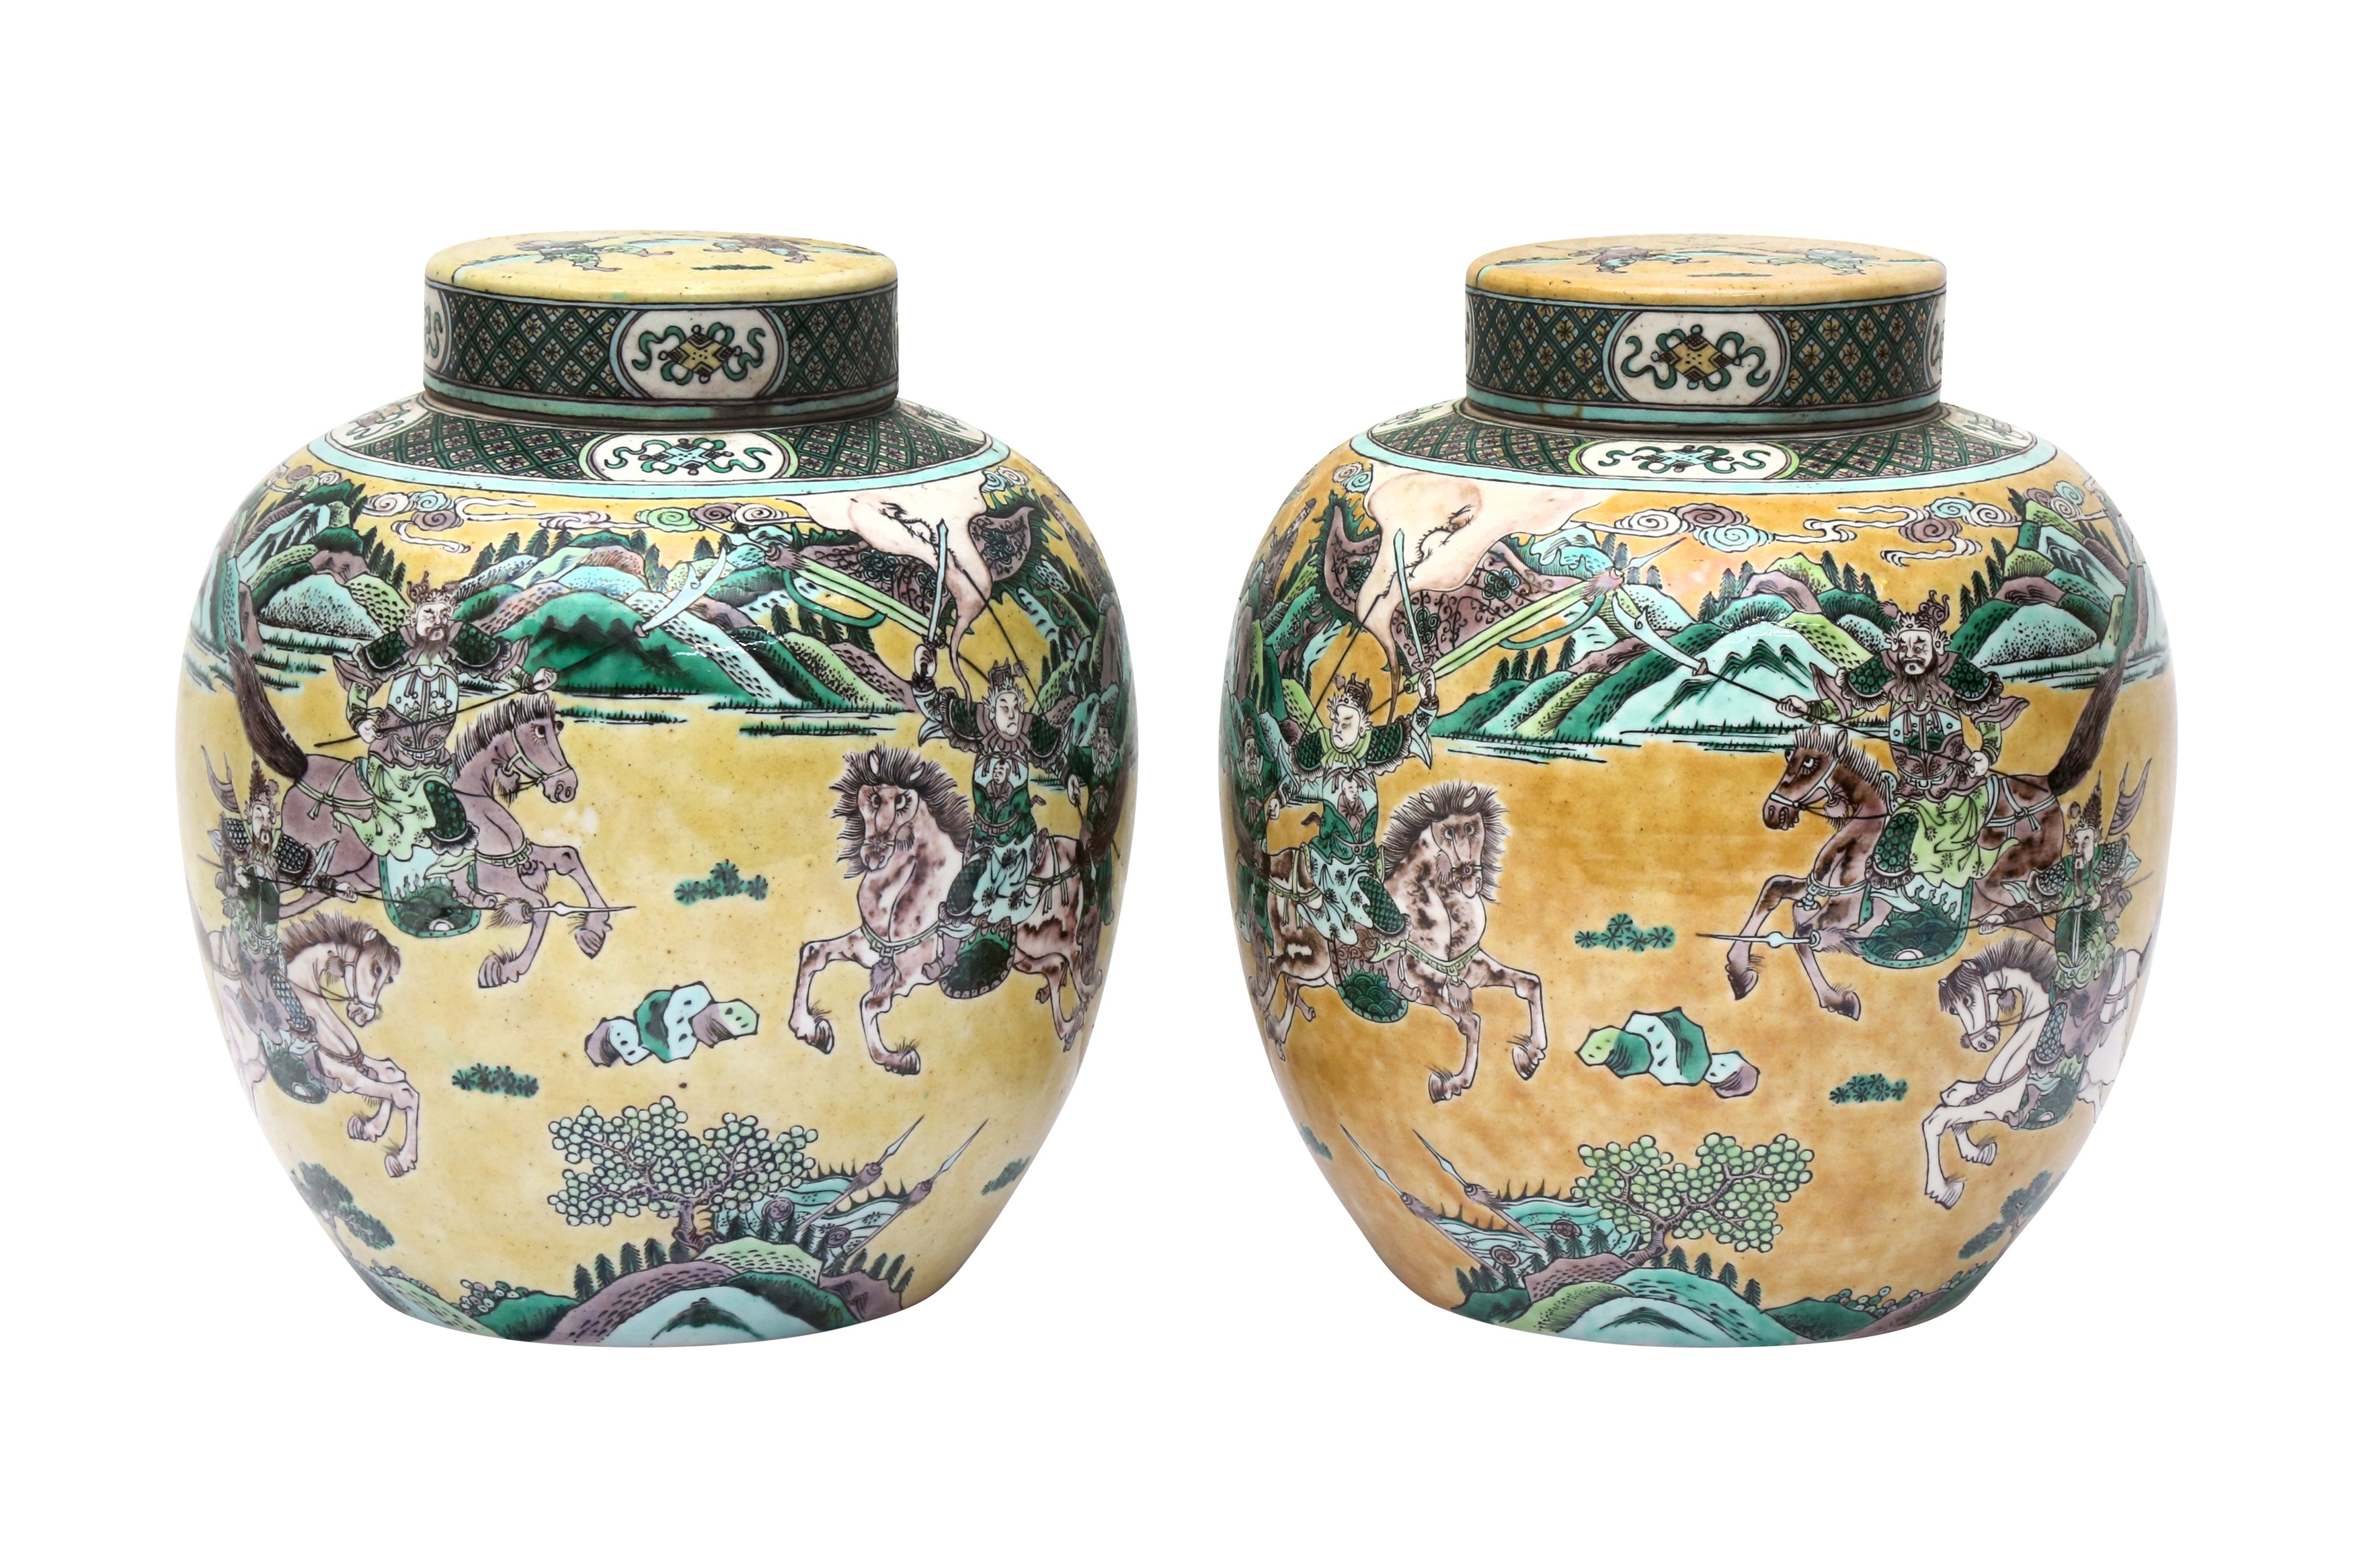 A PAIR OF CHINESE FAMILLE-JAUNE JARS AND COVERS 清十九世紀 三彩勇戰圖紋蓋罐一對